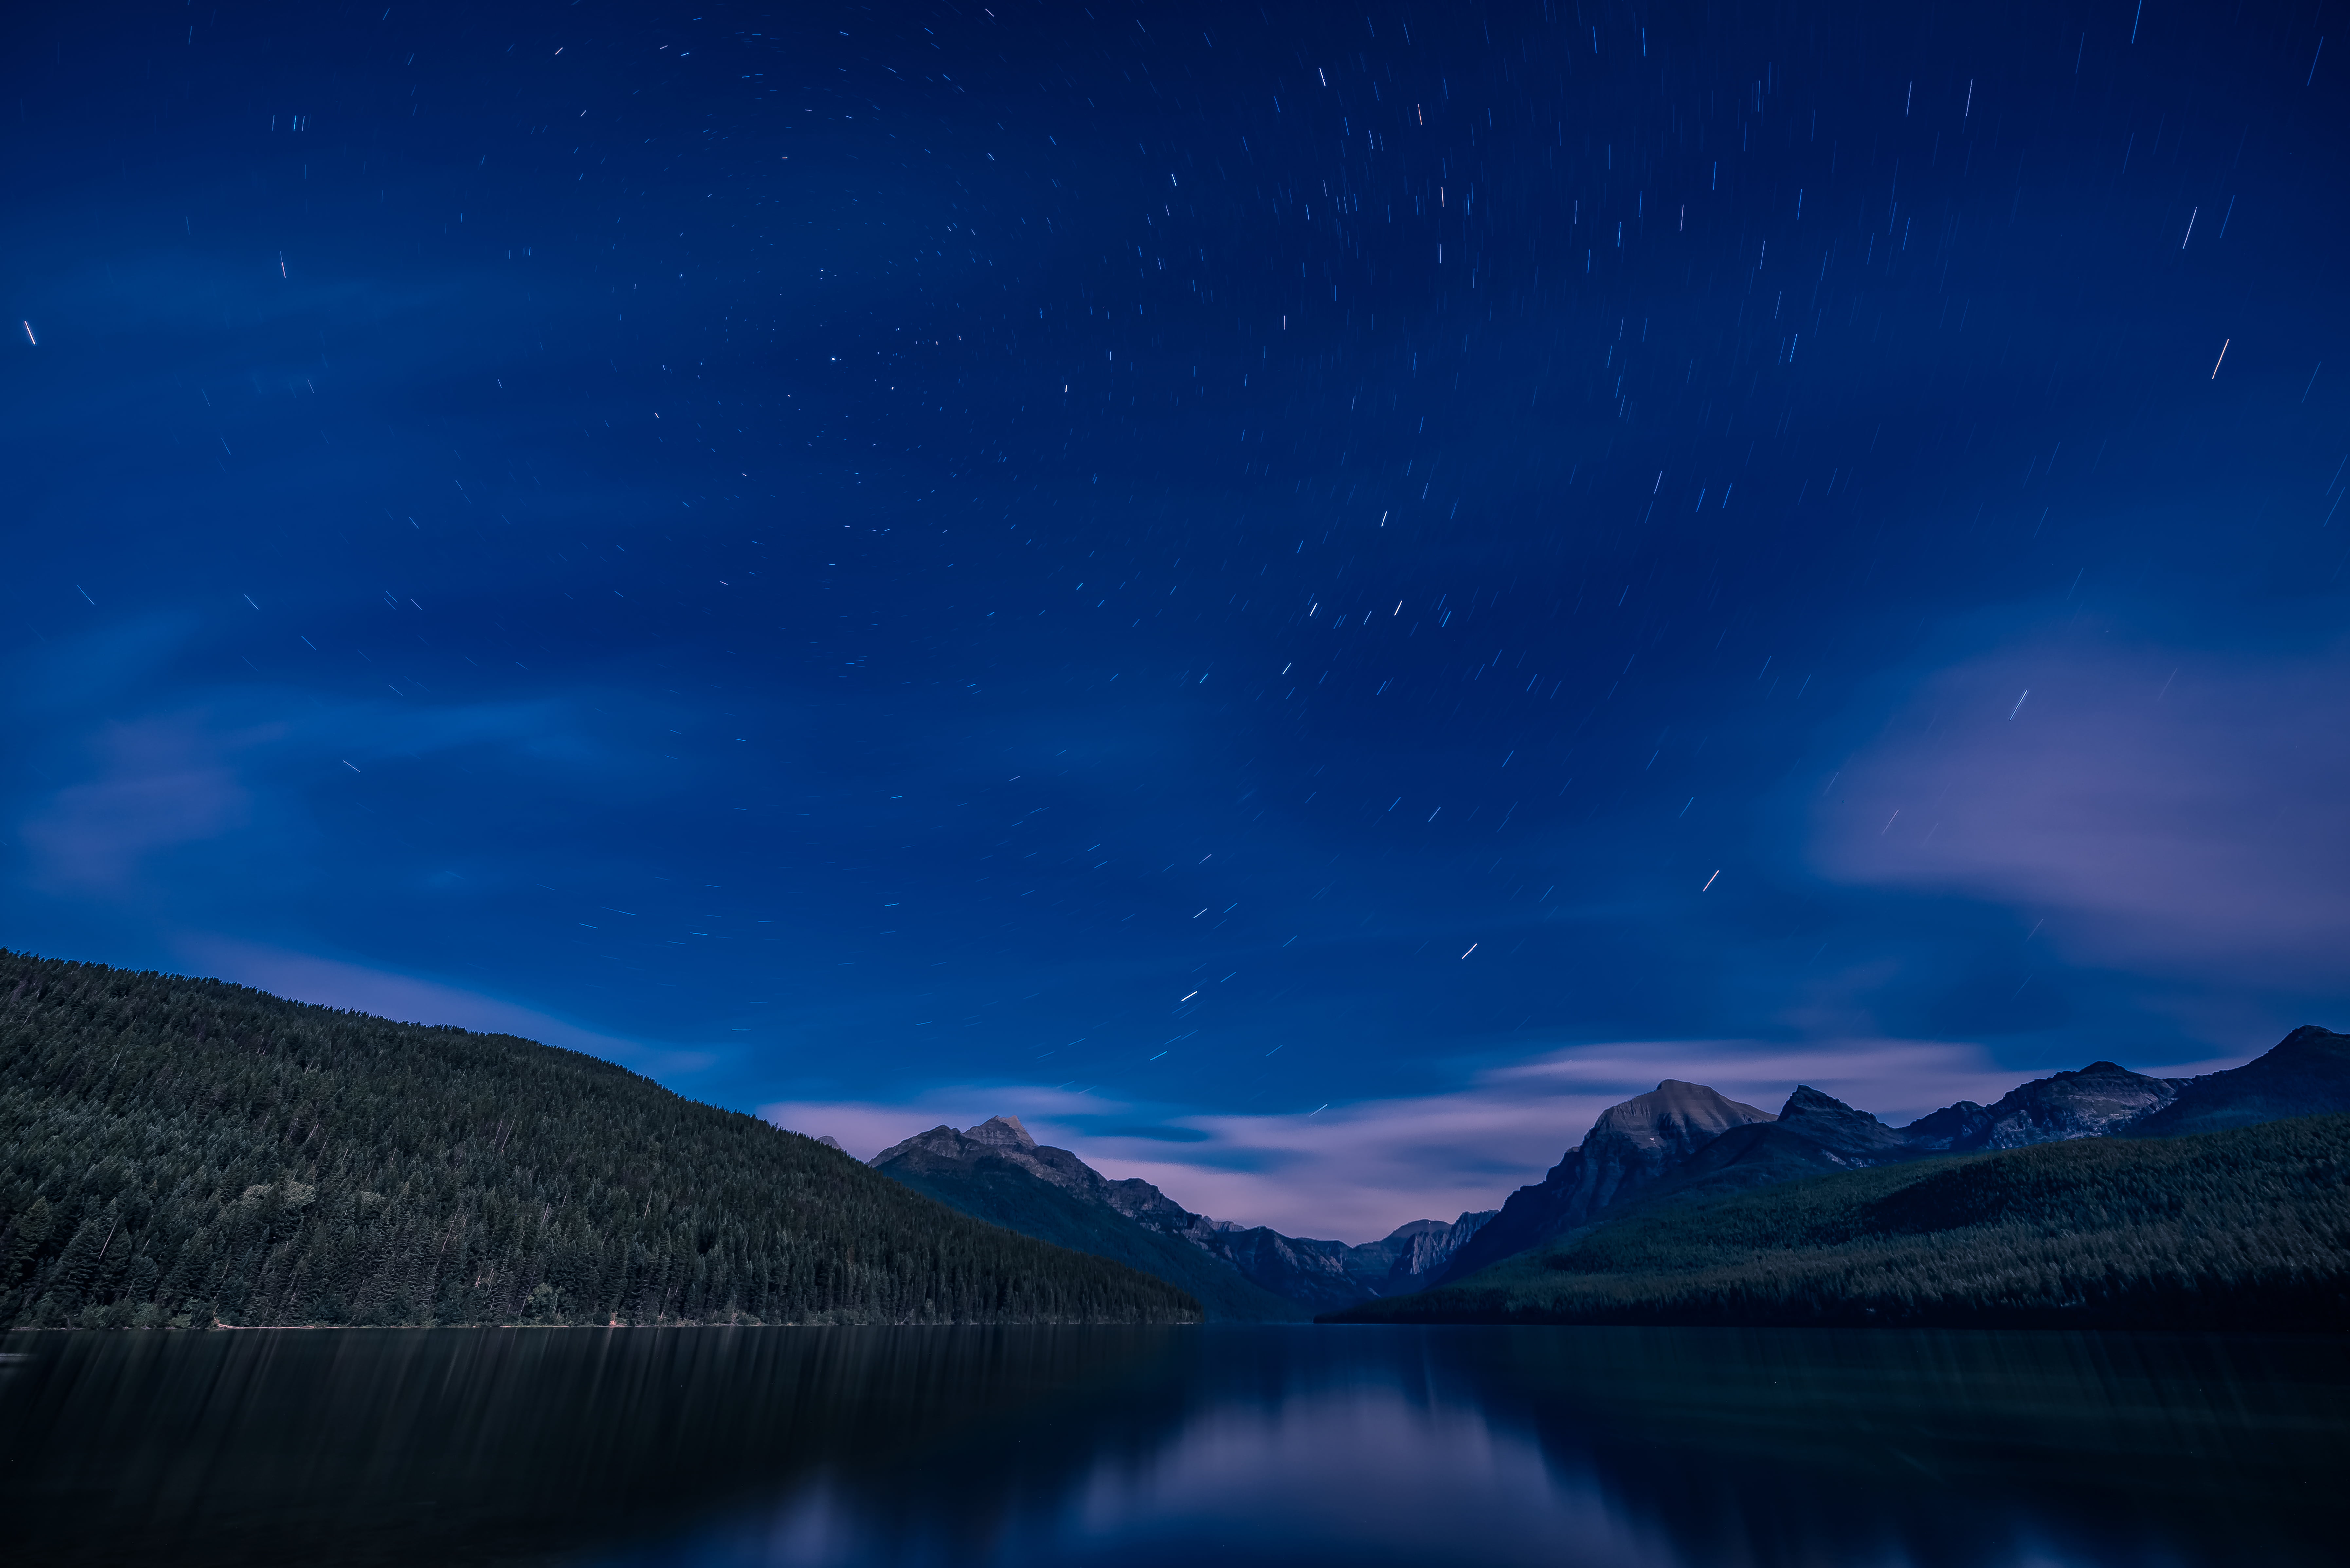 Calm water between two mountains under the blue starry night, bowman